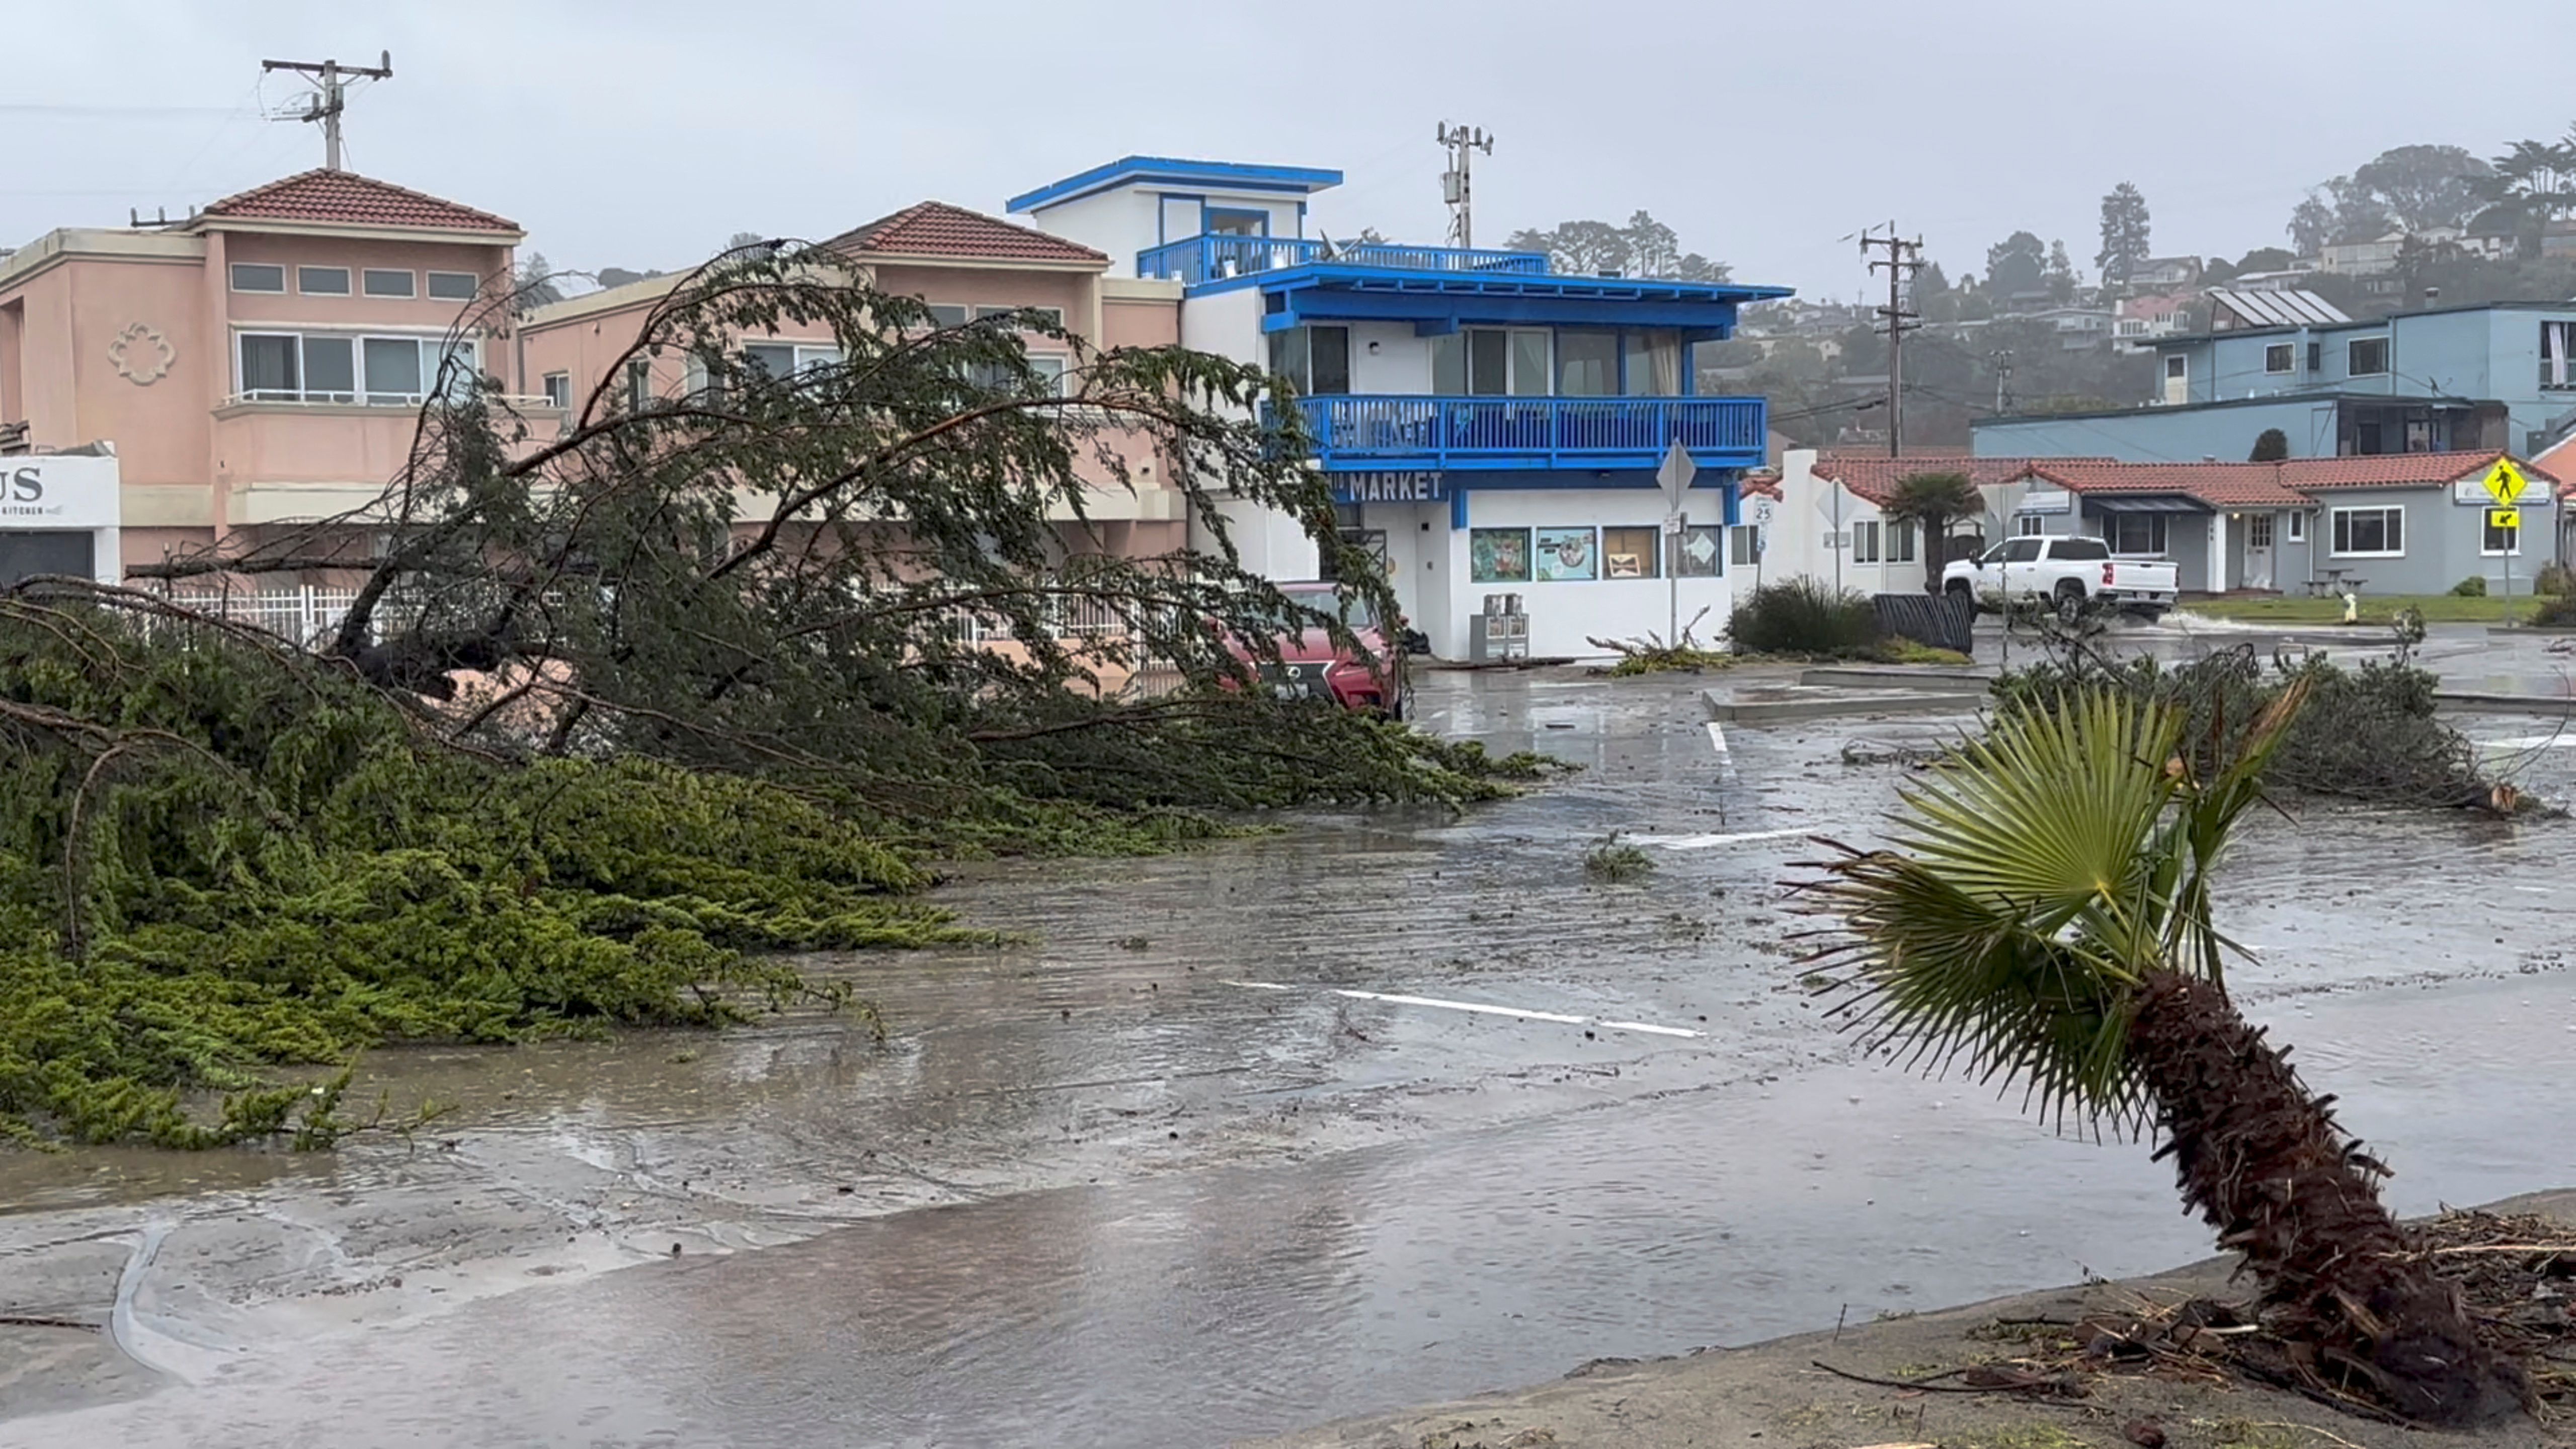 Fallen trees lie in the street after a bomb cyclone in Rio del Mar, California, USA.